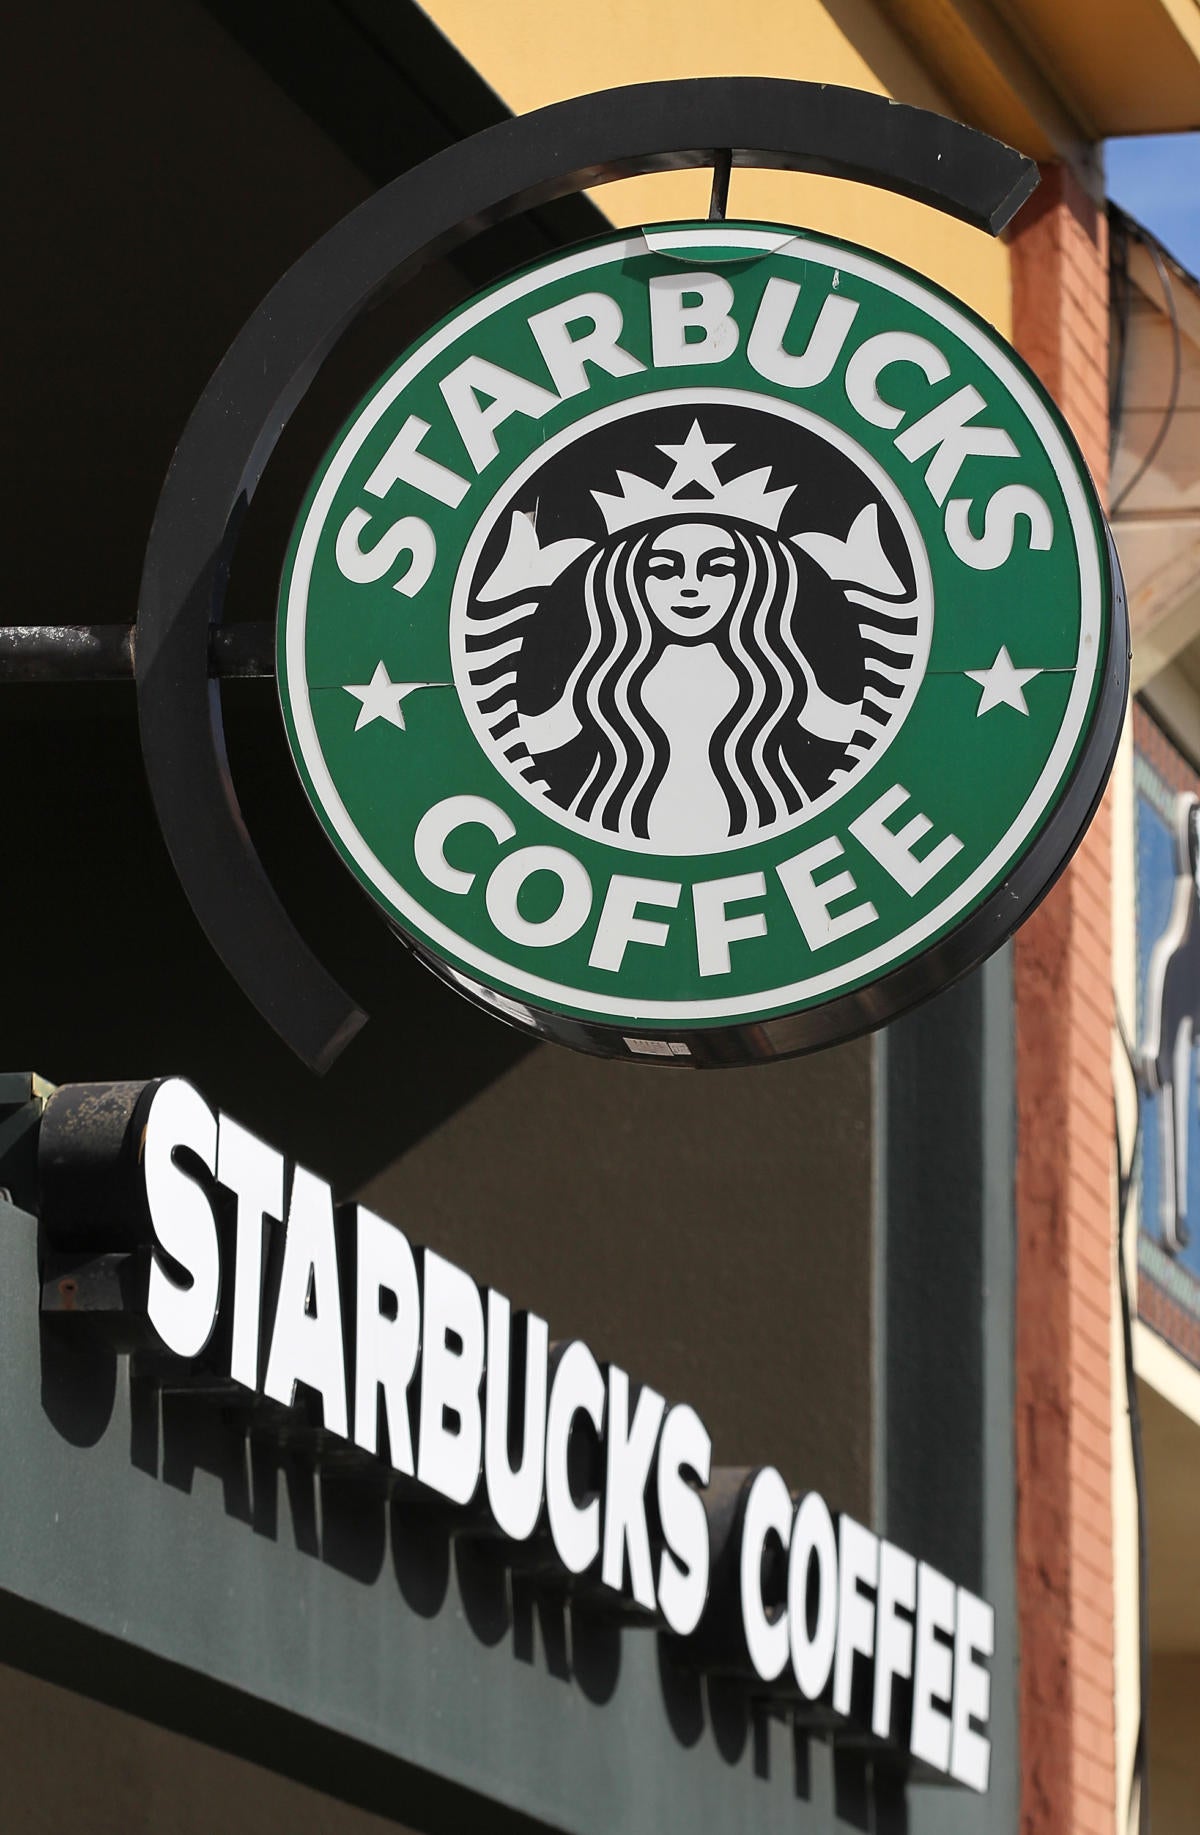 New CTO role at Starbucks reflects rise of digital business | CIO